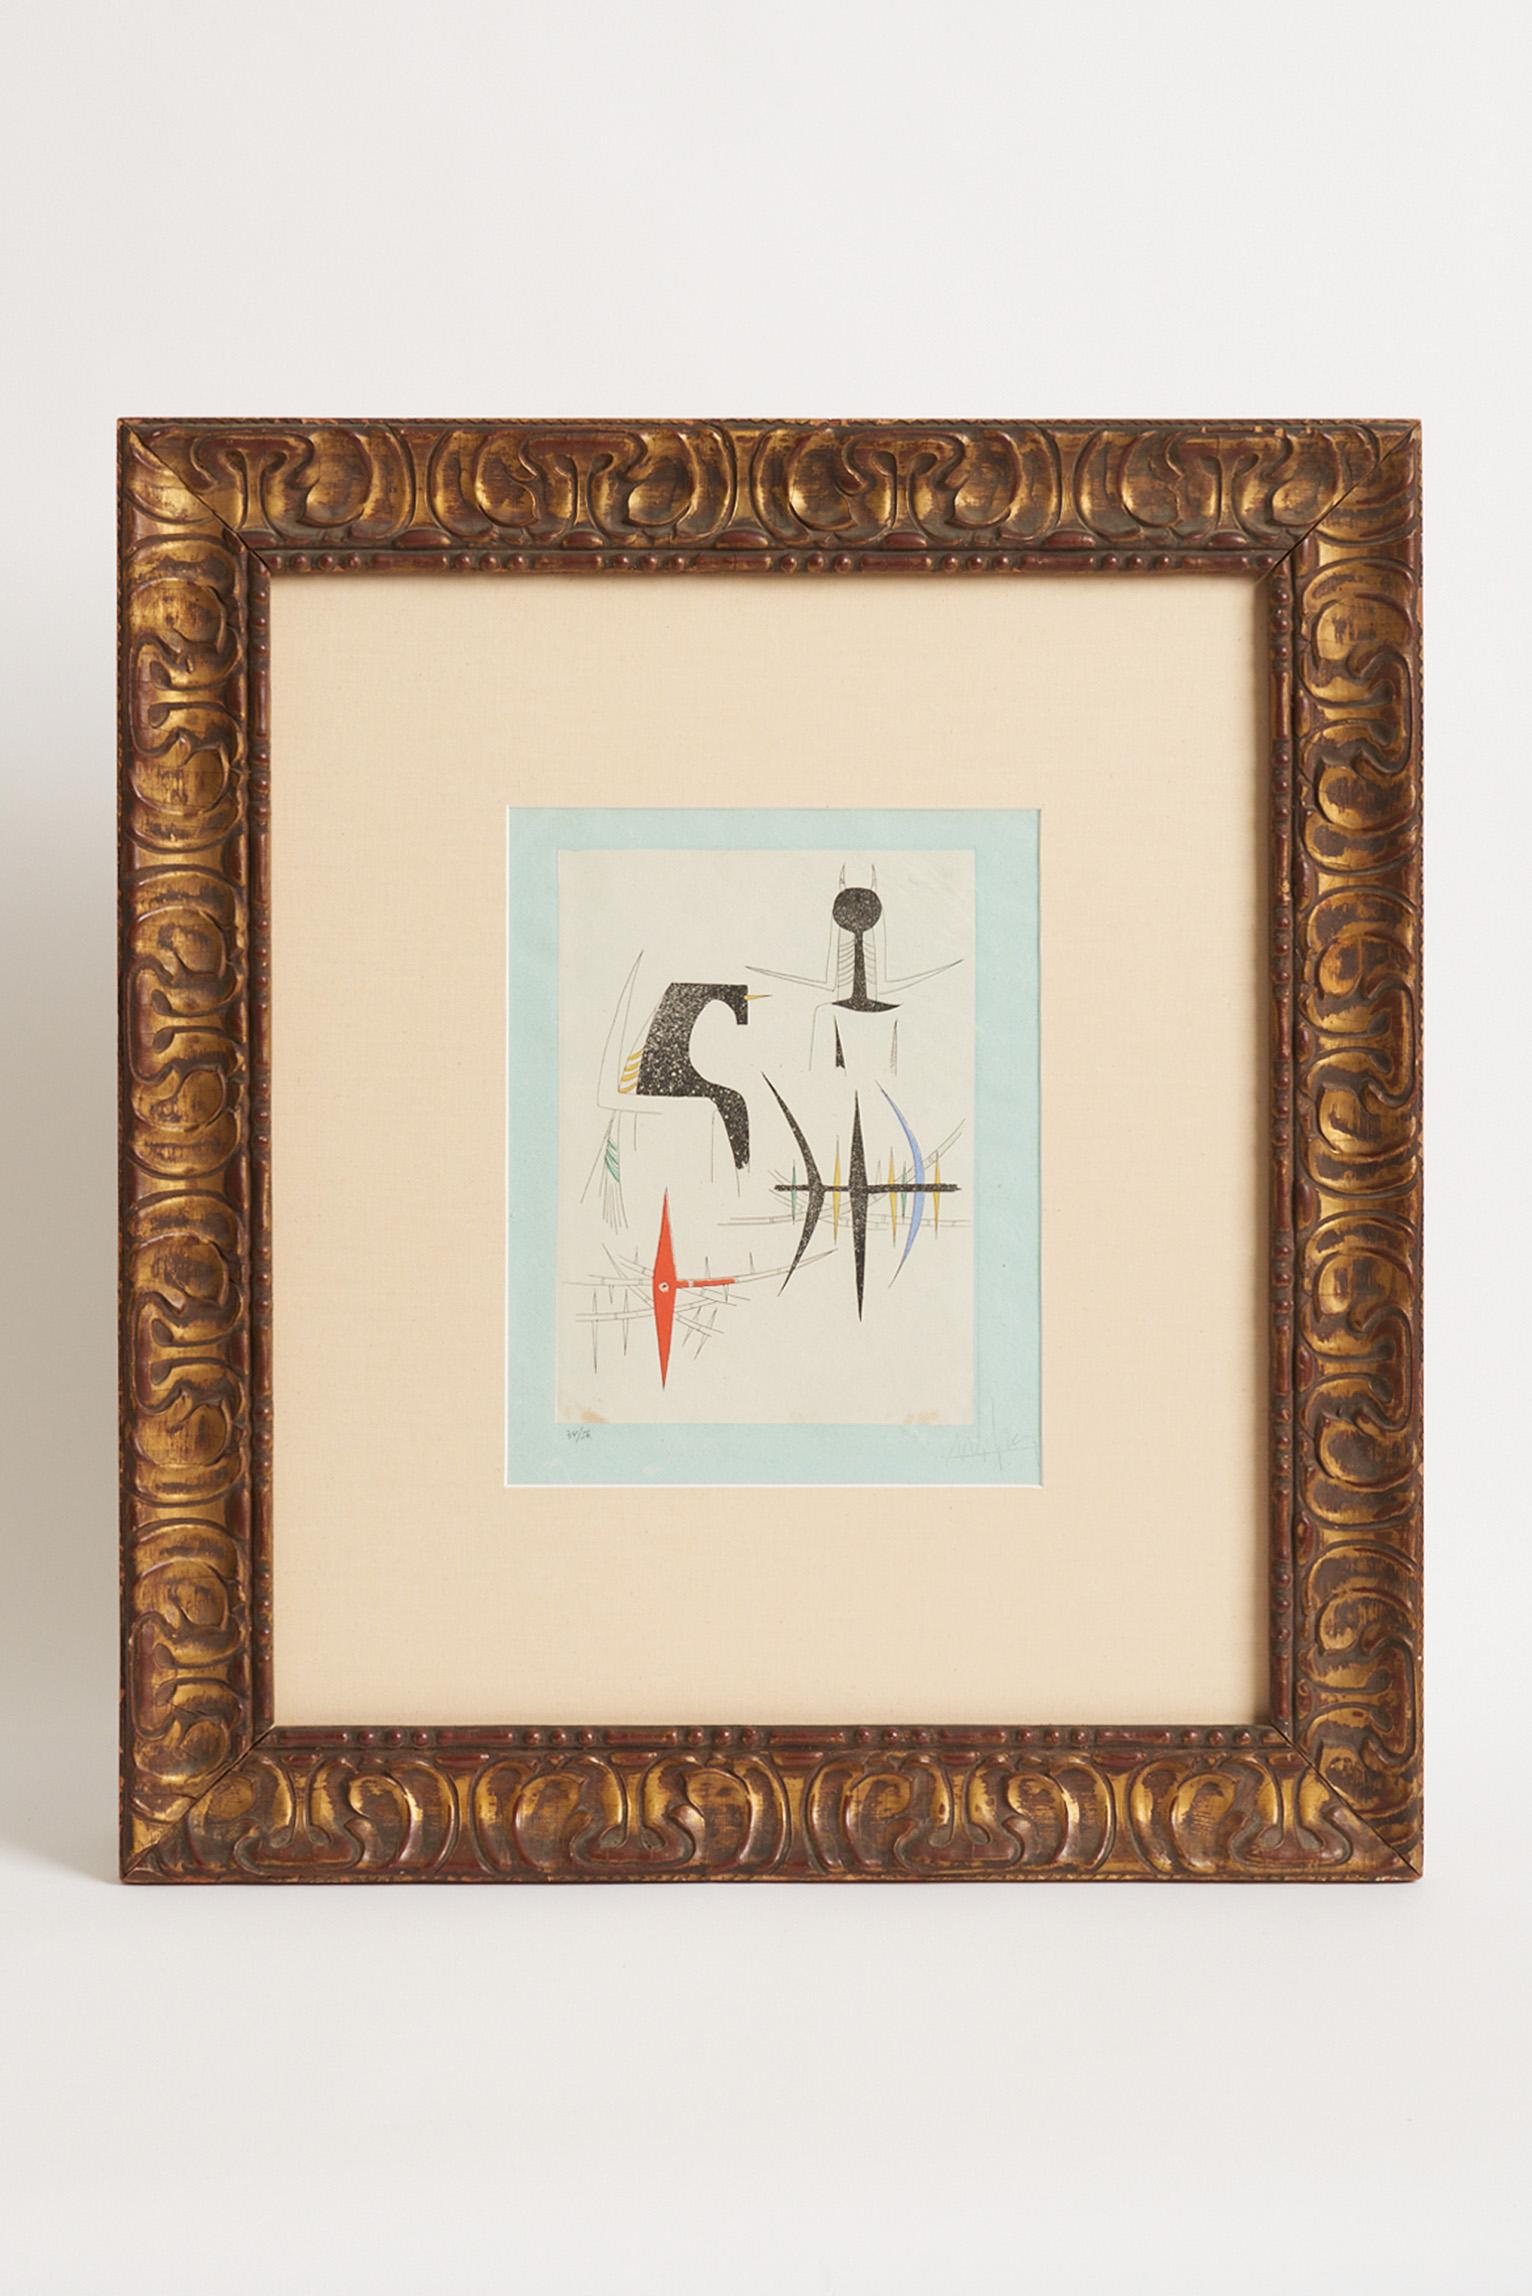 A polychrome lithograph by Wilfredo Lam (1902-1982).
Hand signed in pencil and numbered 34/56.